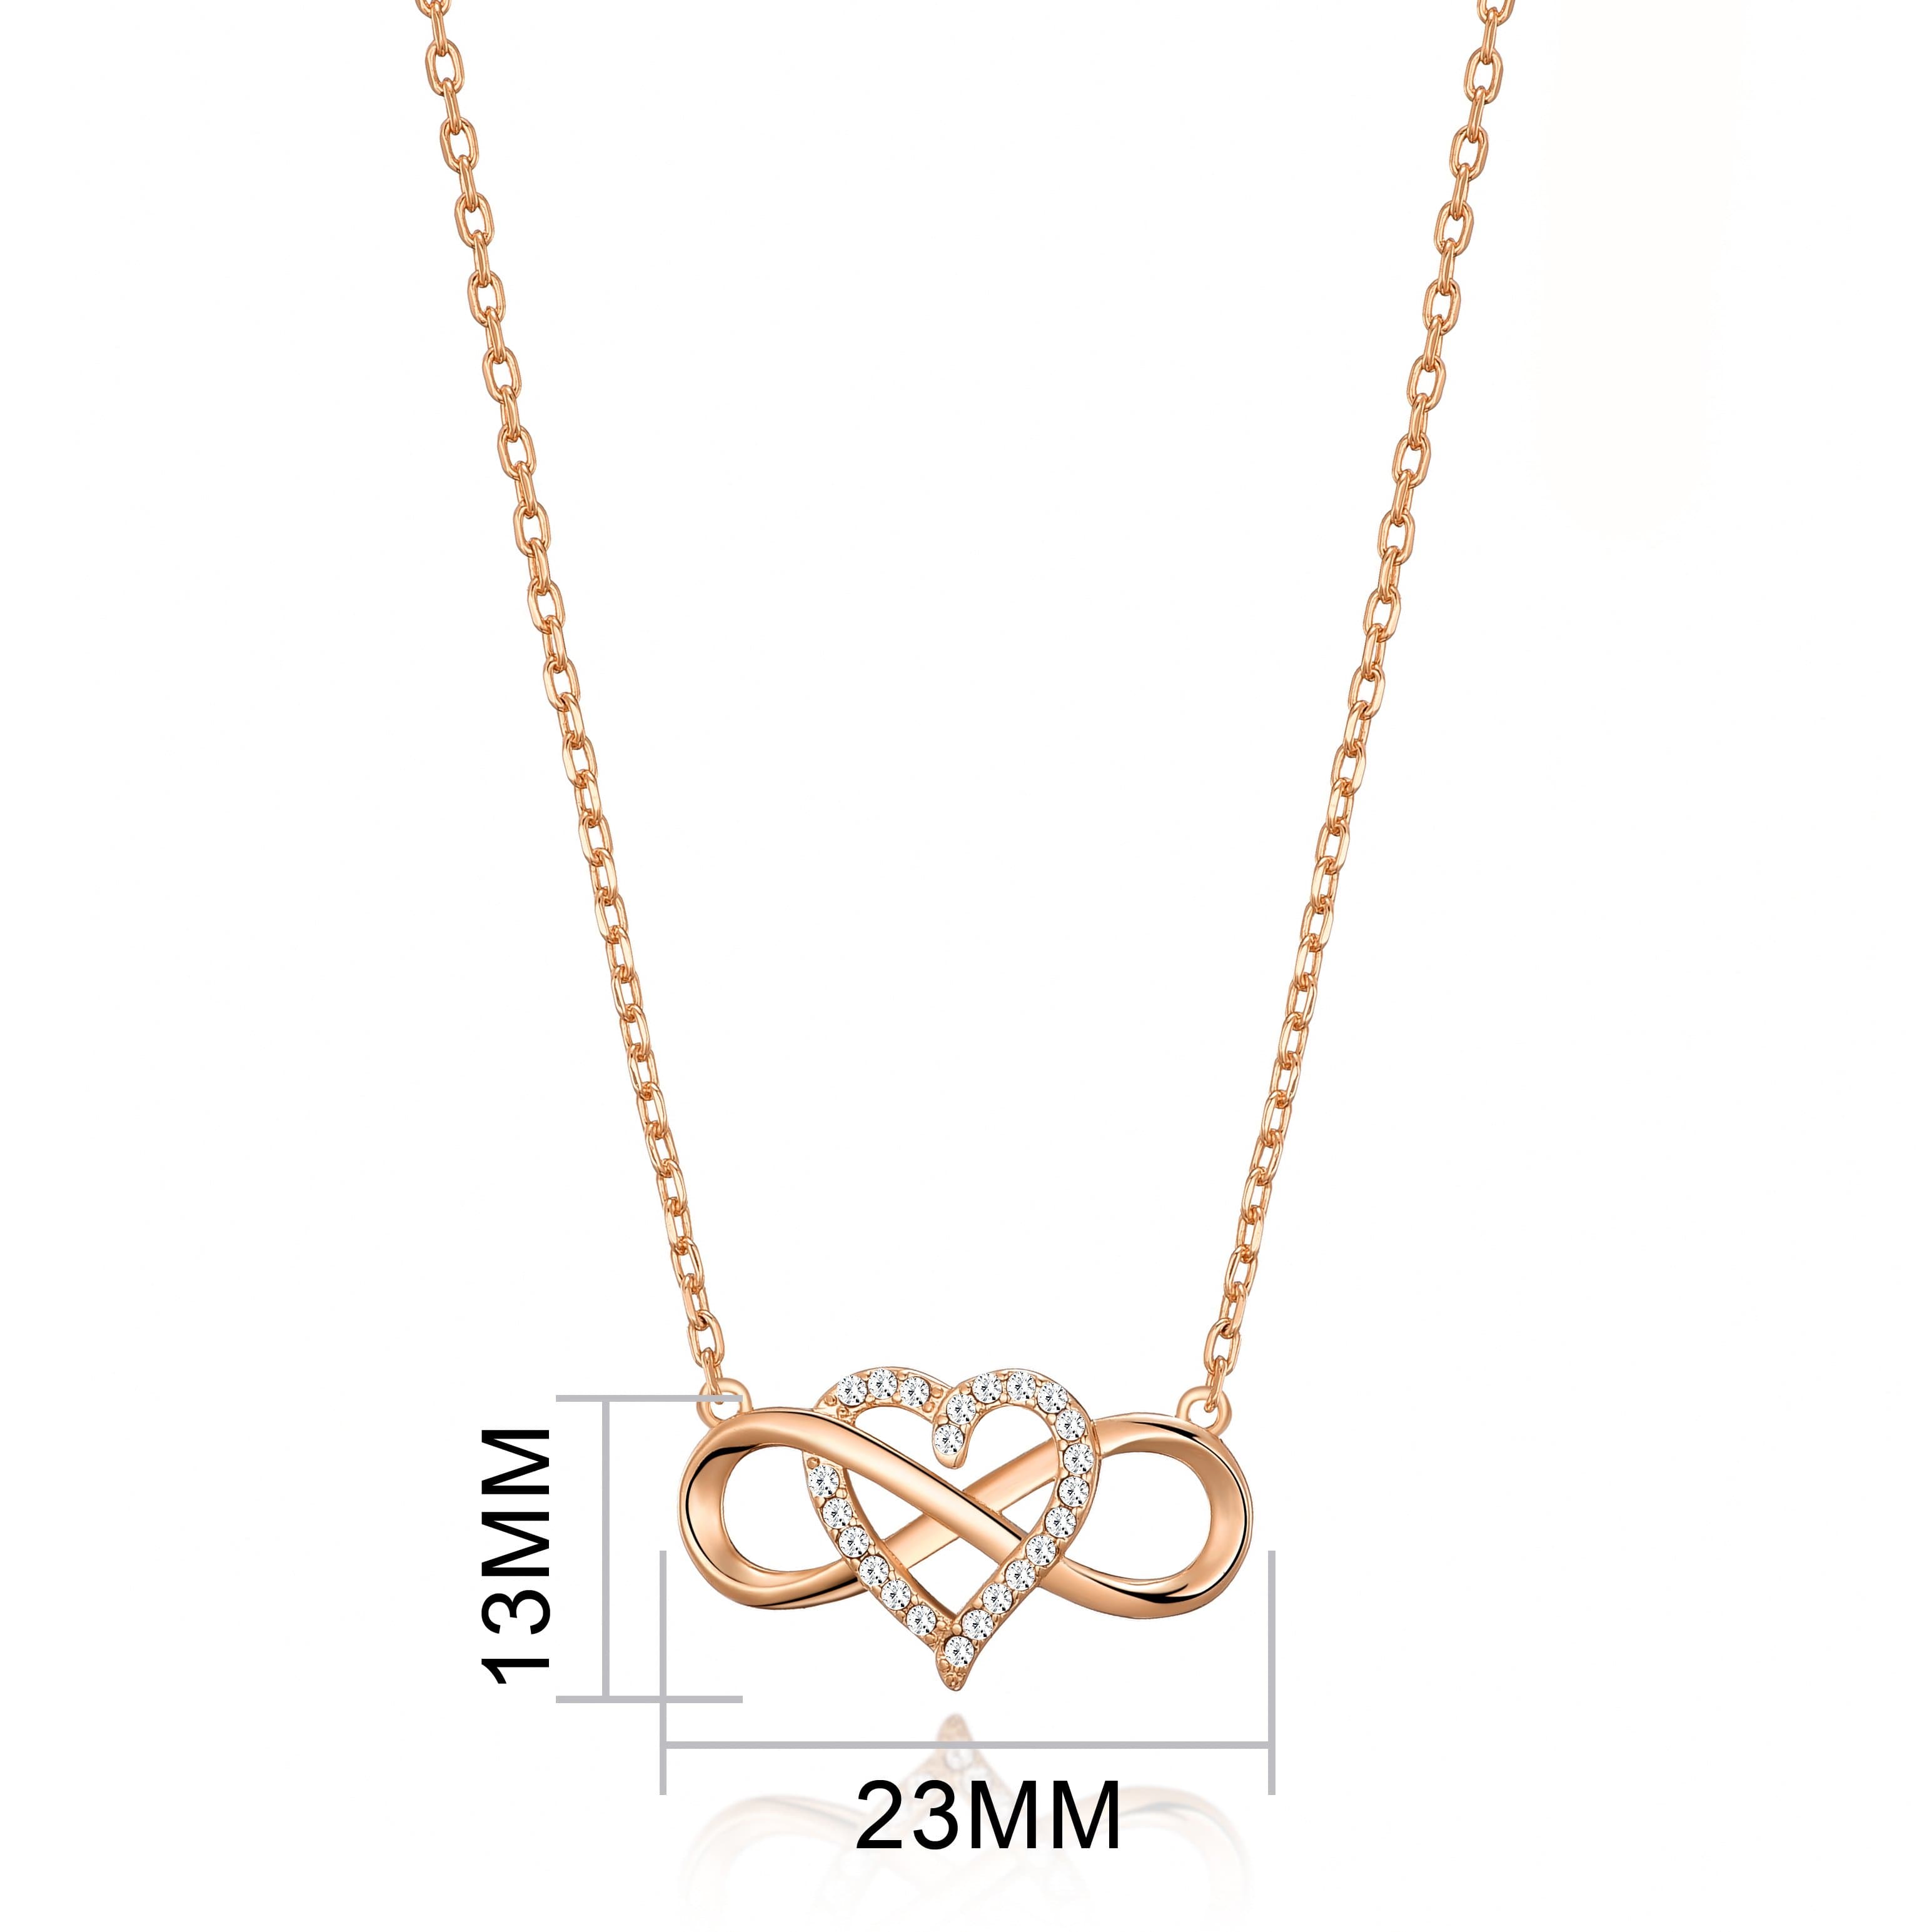 Rose Gold Plated Infinity Heart Necklace Created with Zircondia® Crystals